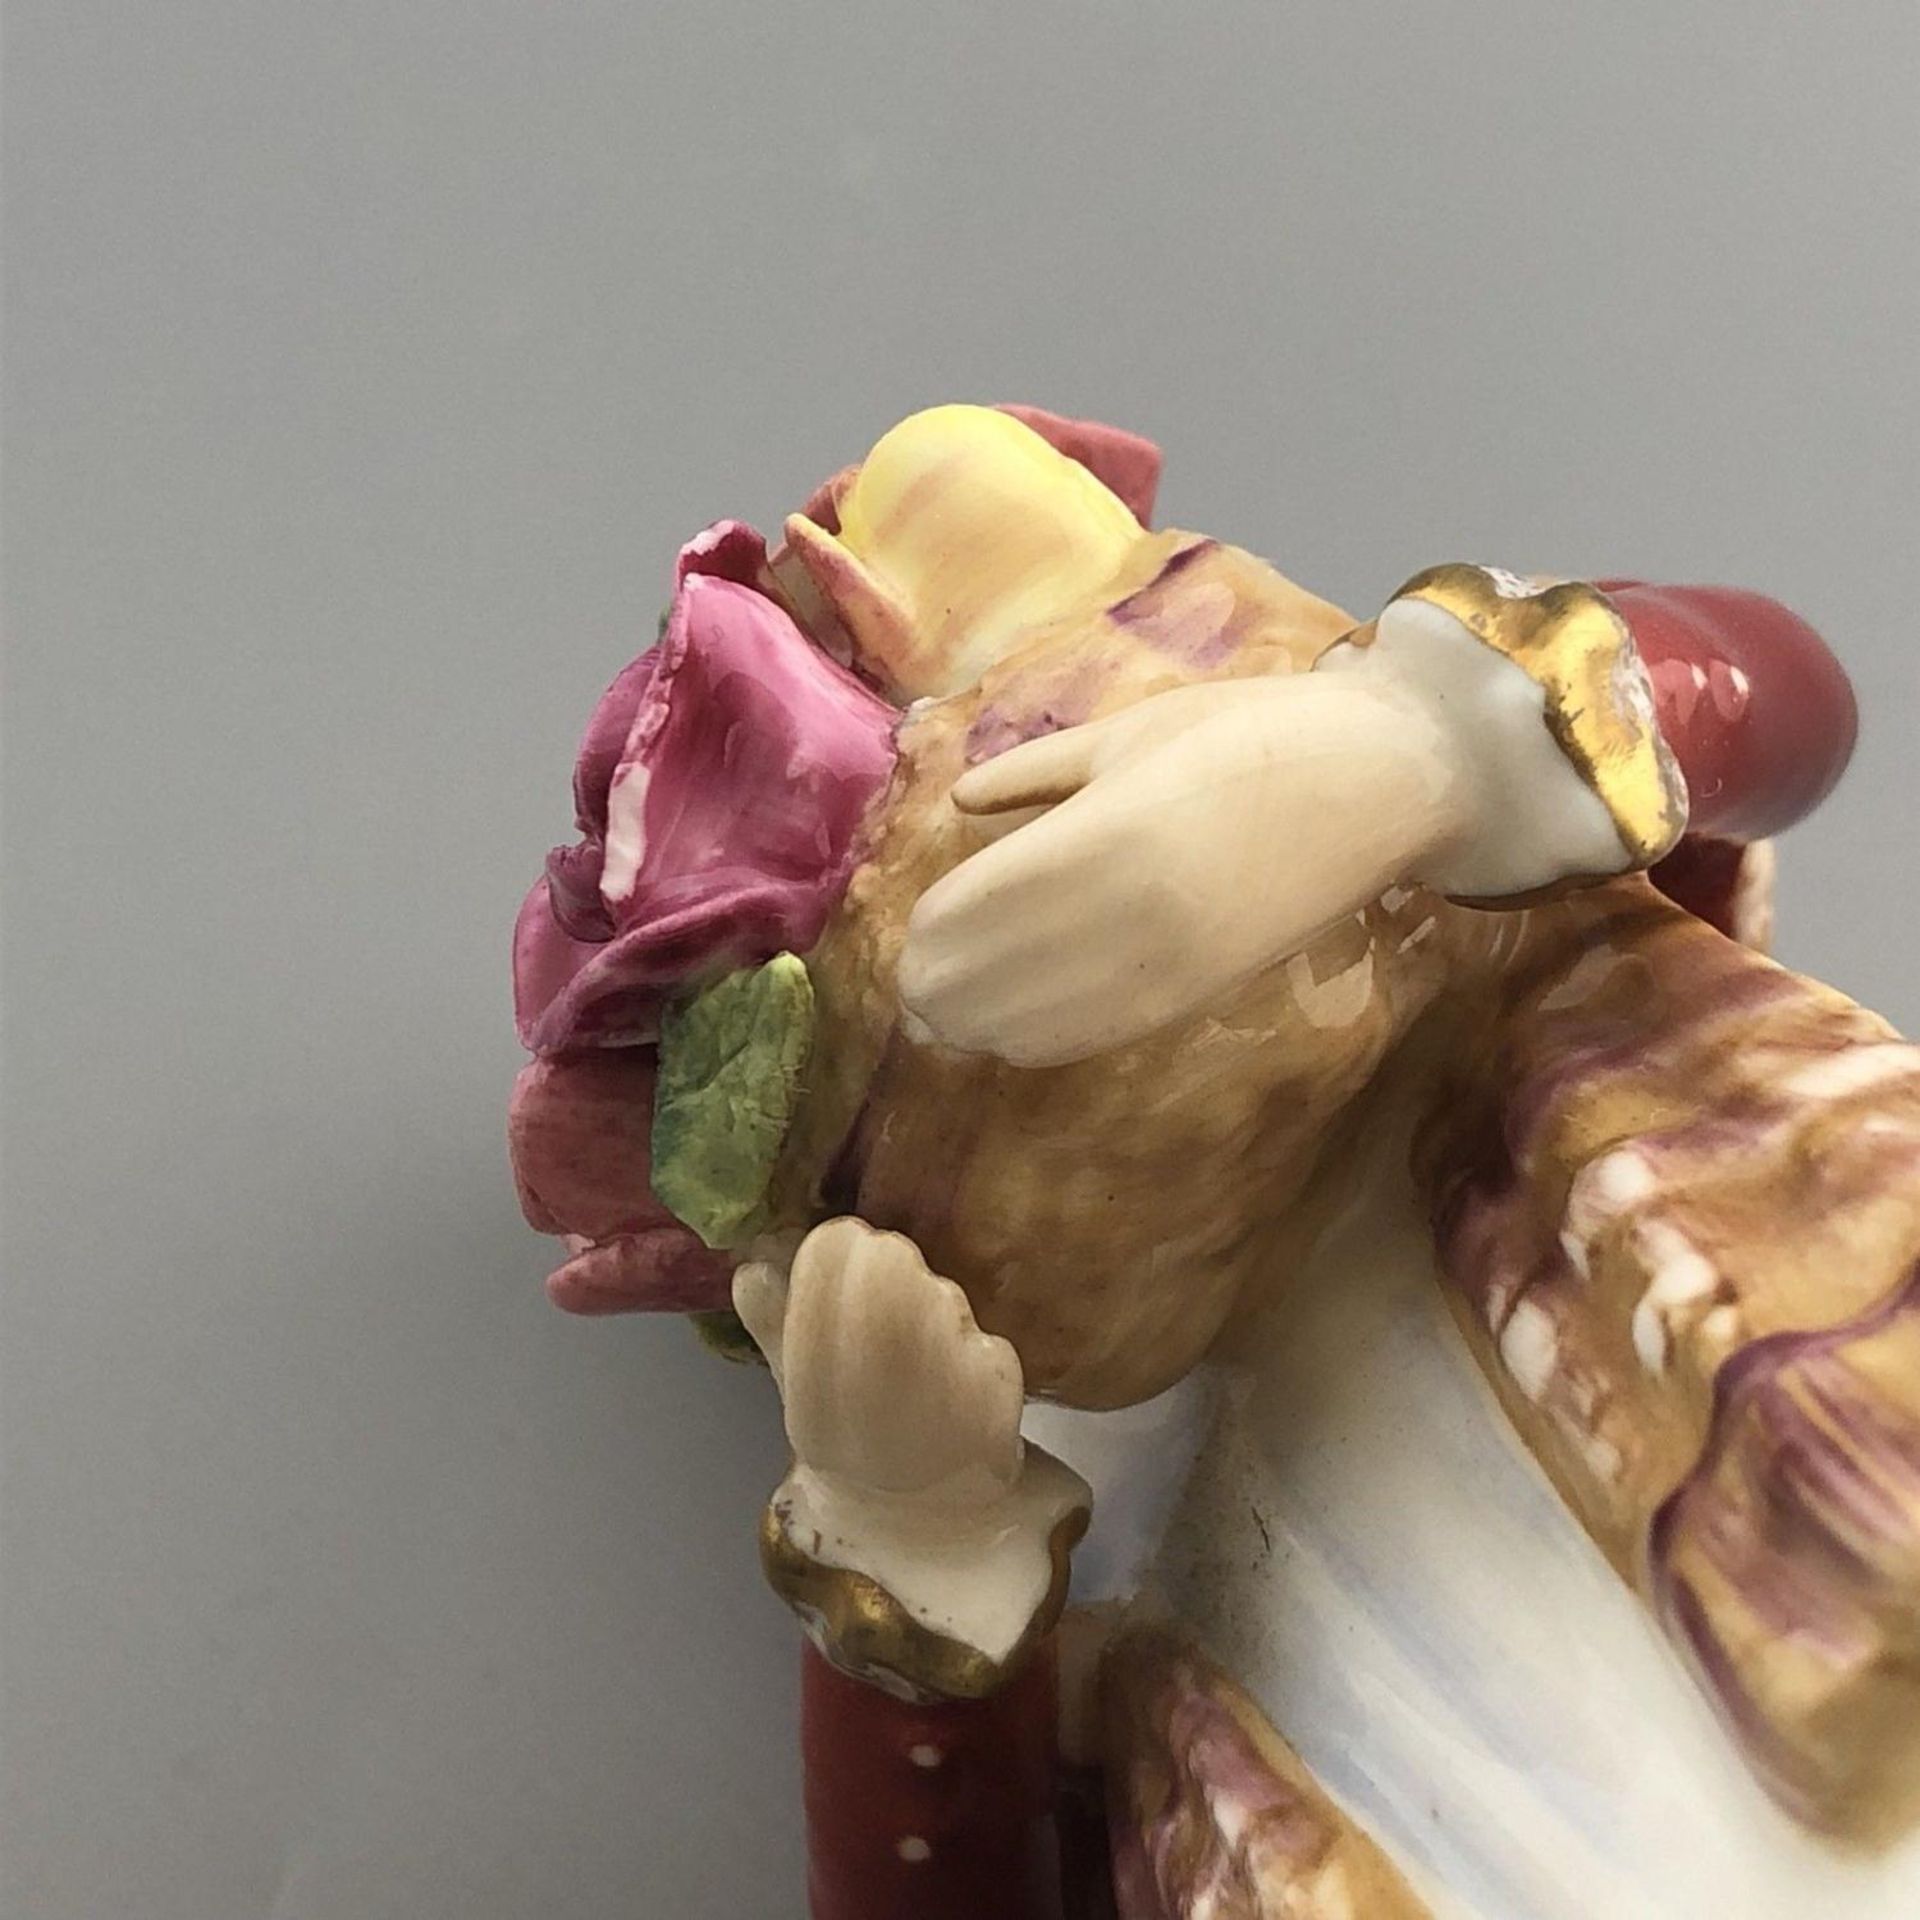 English Porcelain Figurine "Old Country Roses" - Royal Doulton HN 3692 - Image 6 of 7